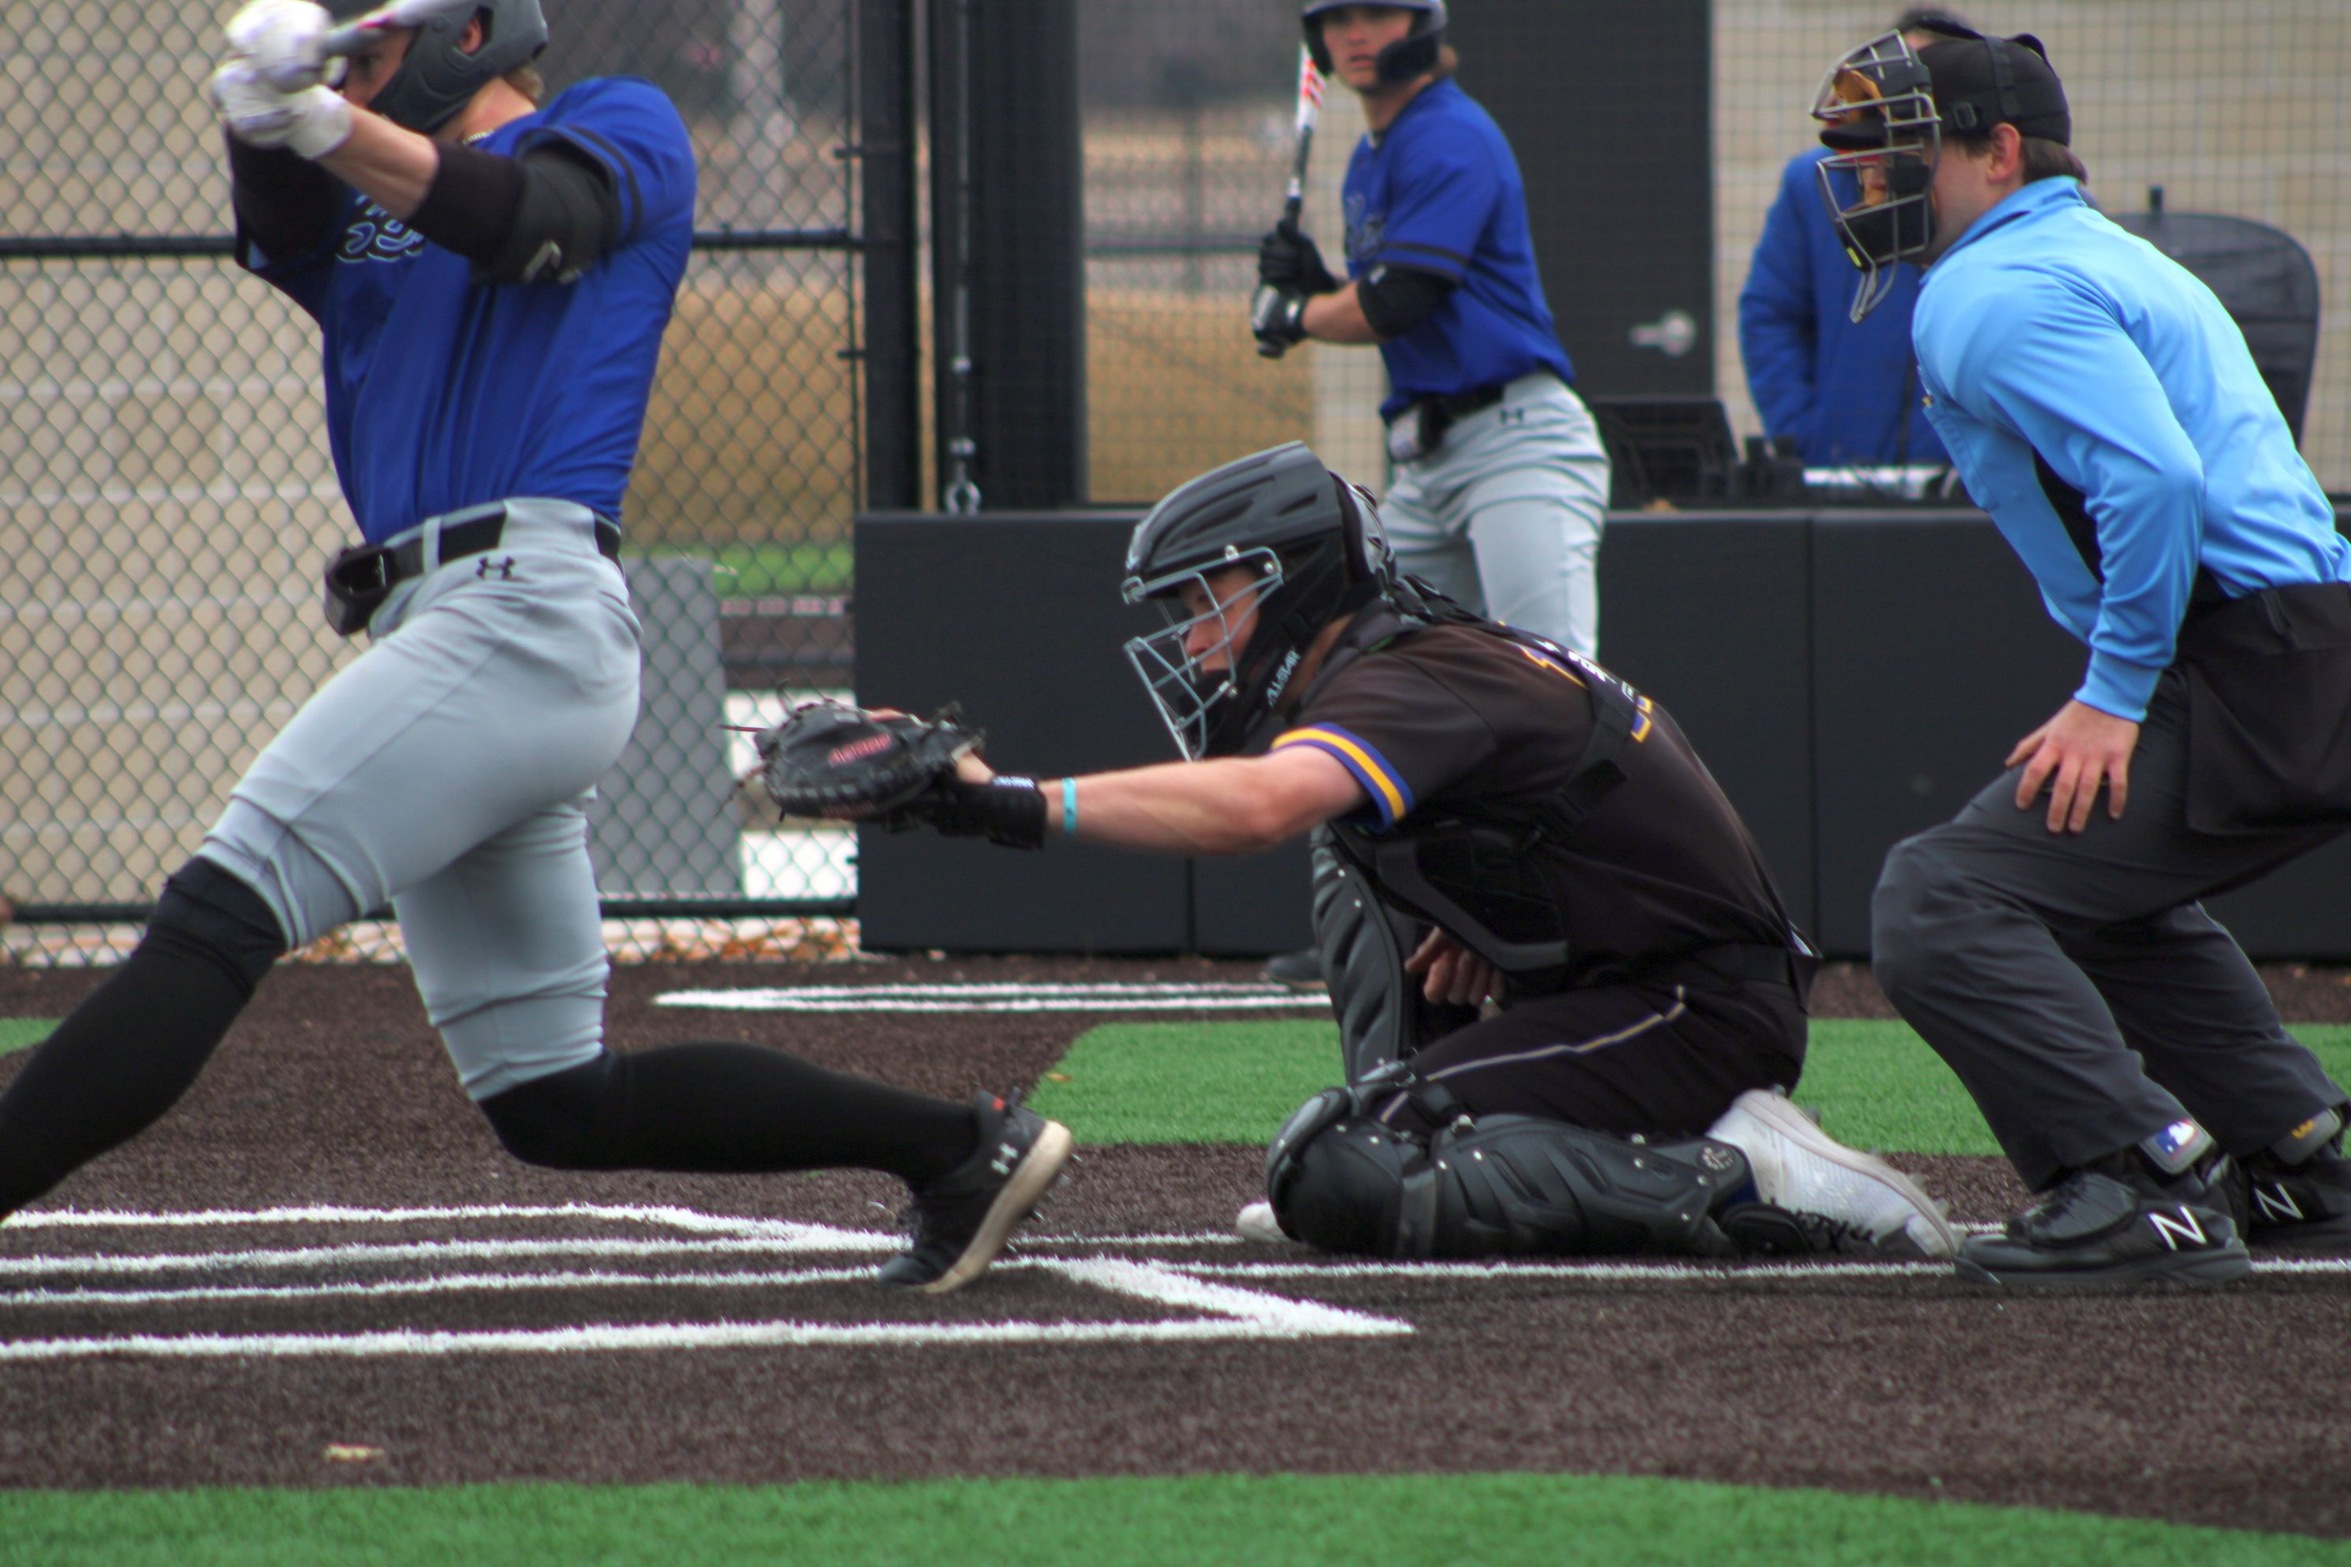 NIACC's Adam Berghult catches a pitch in Monday's game against DMACC in Clarion.